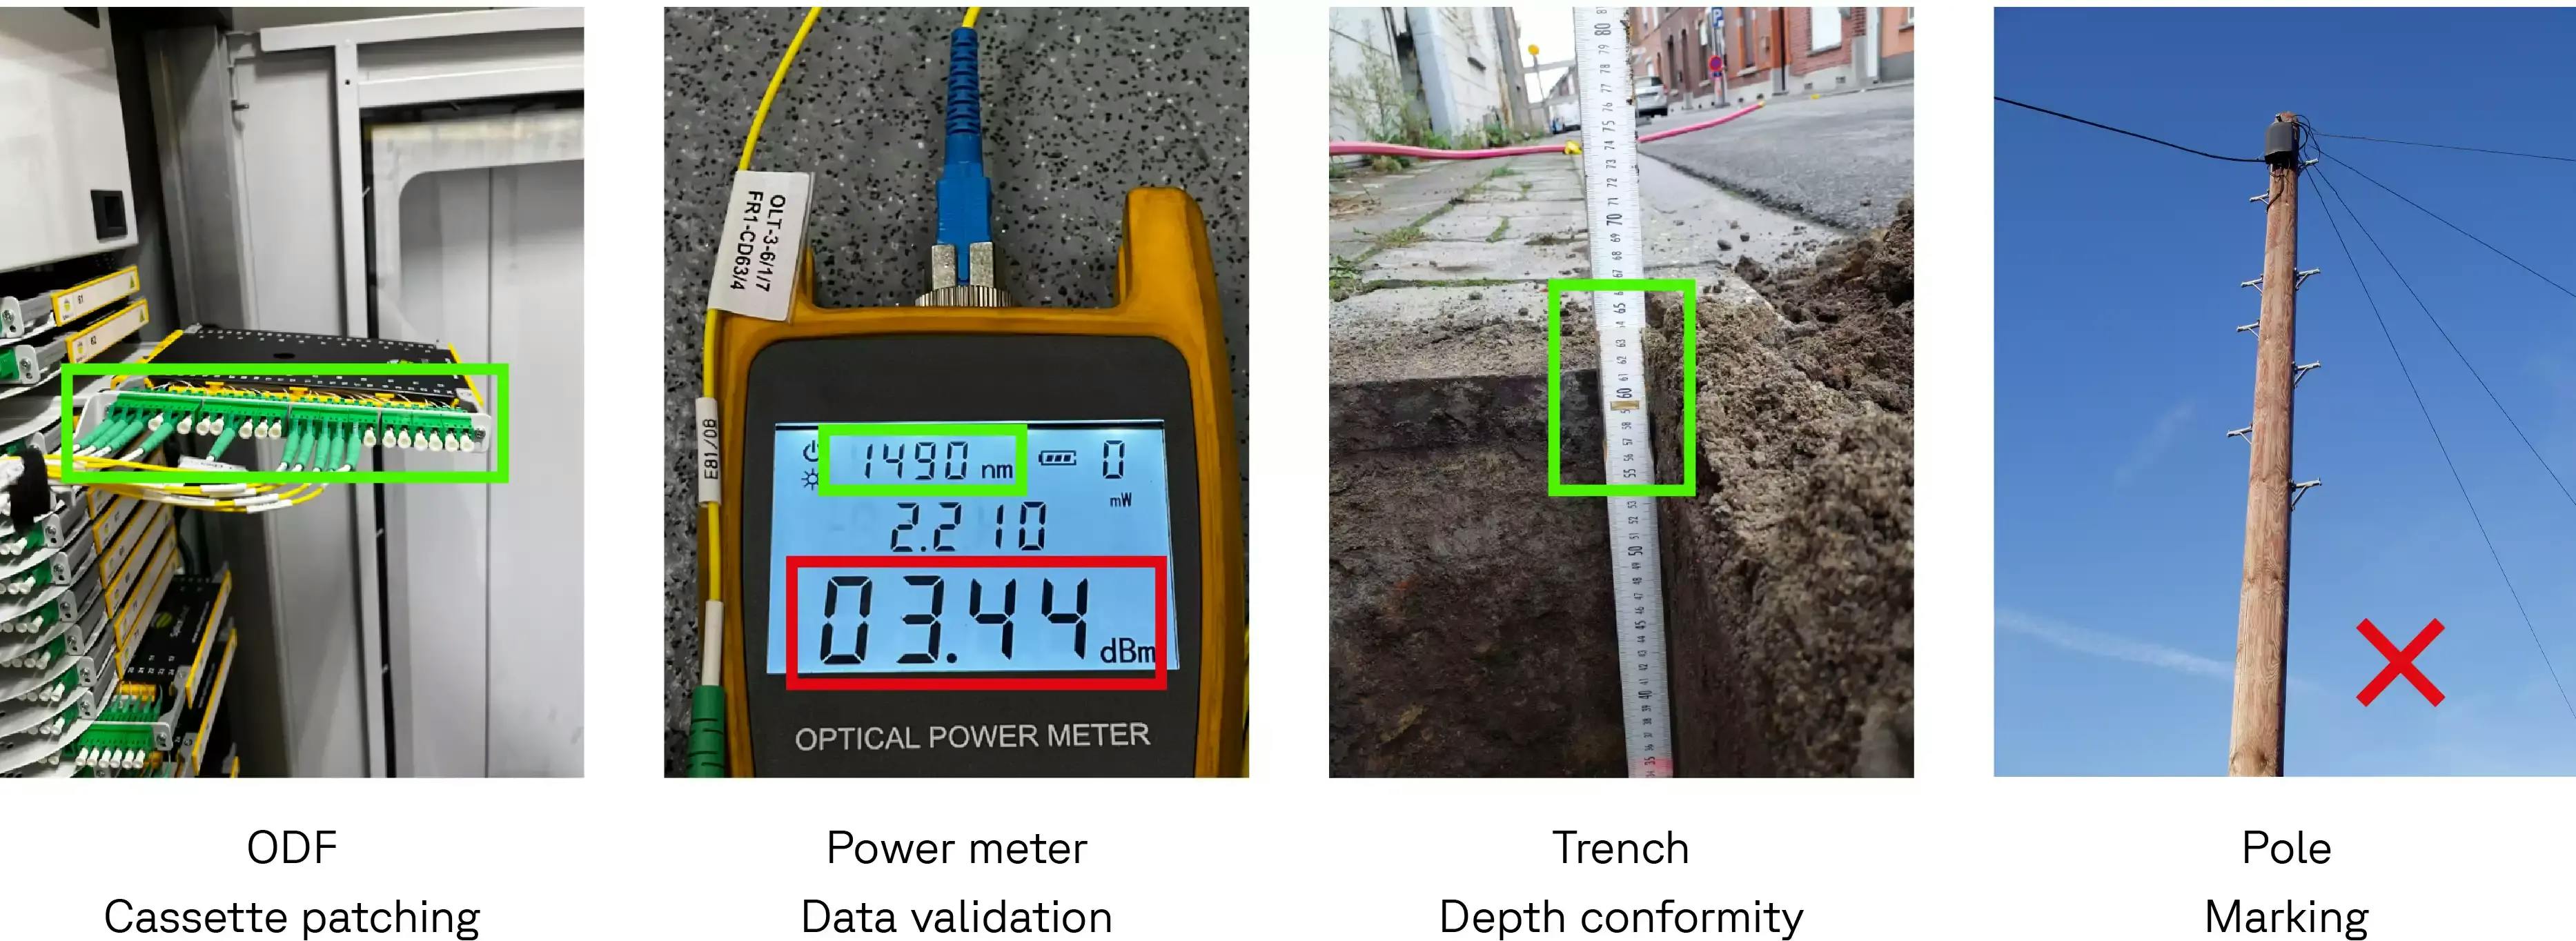 Photos of fiber equipment with checkpoints analysed by Deepomatic's AI